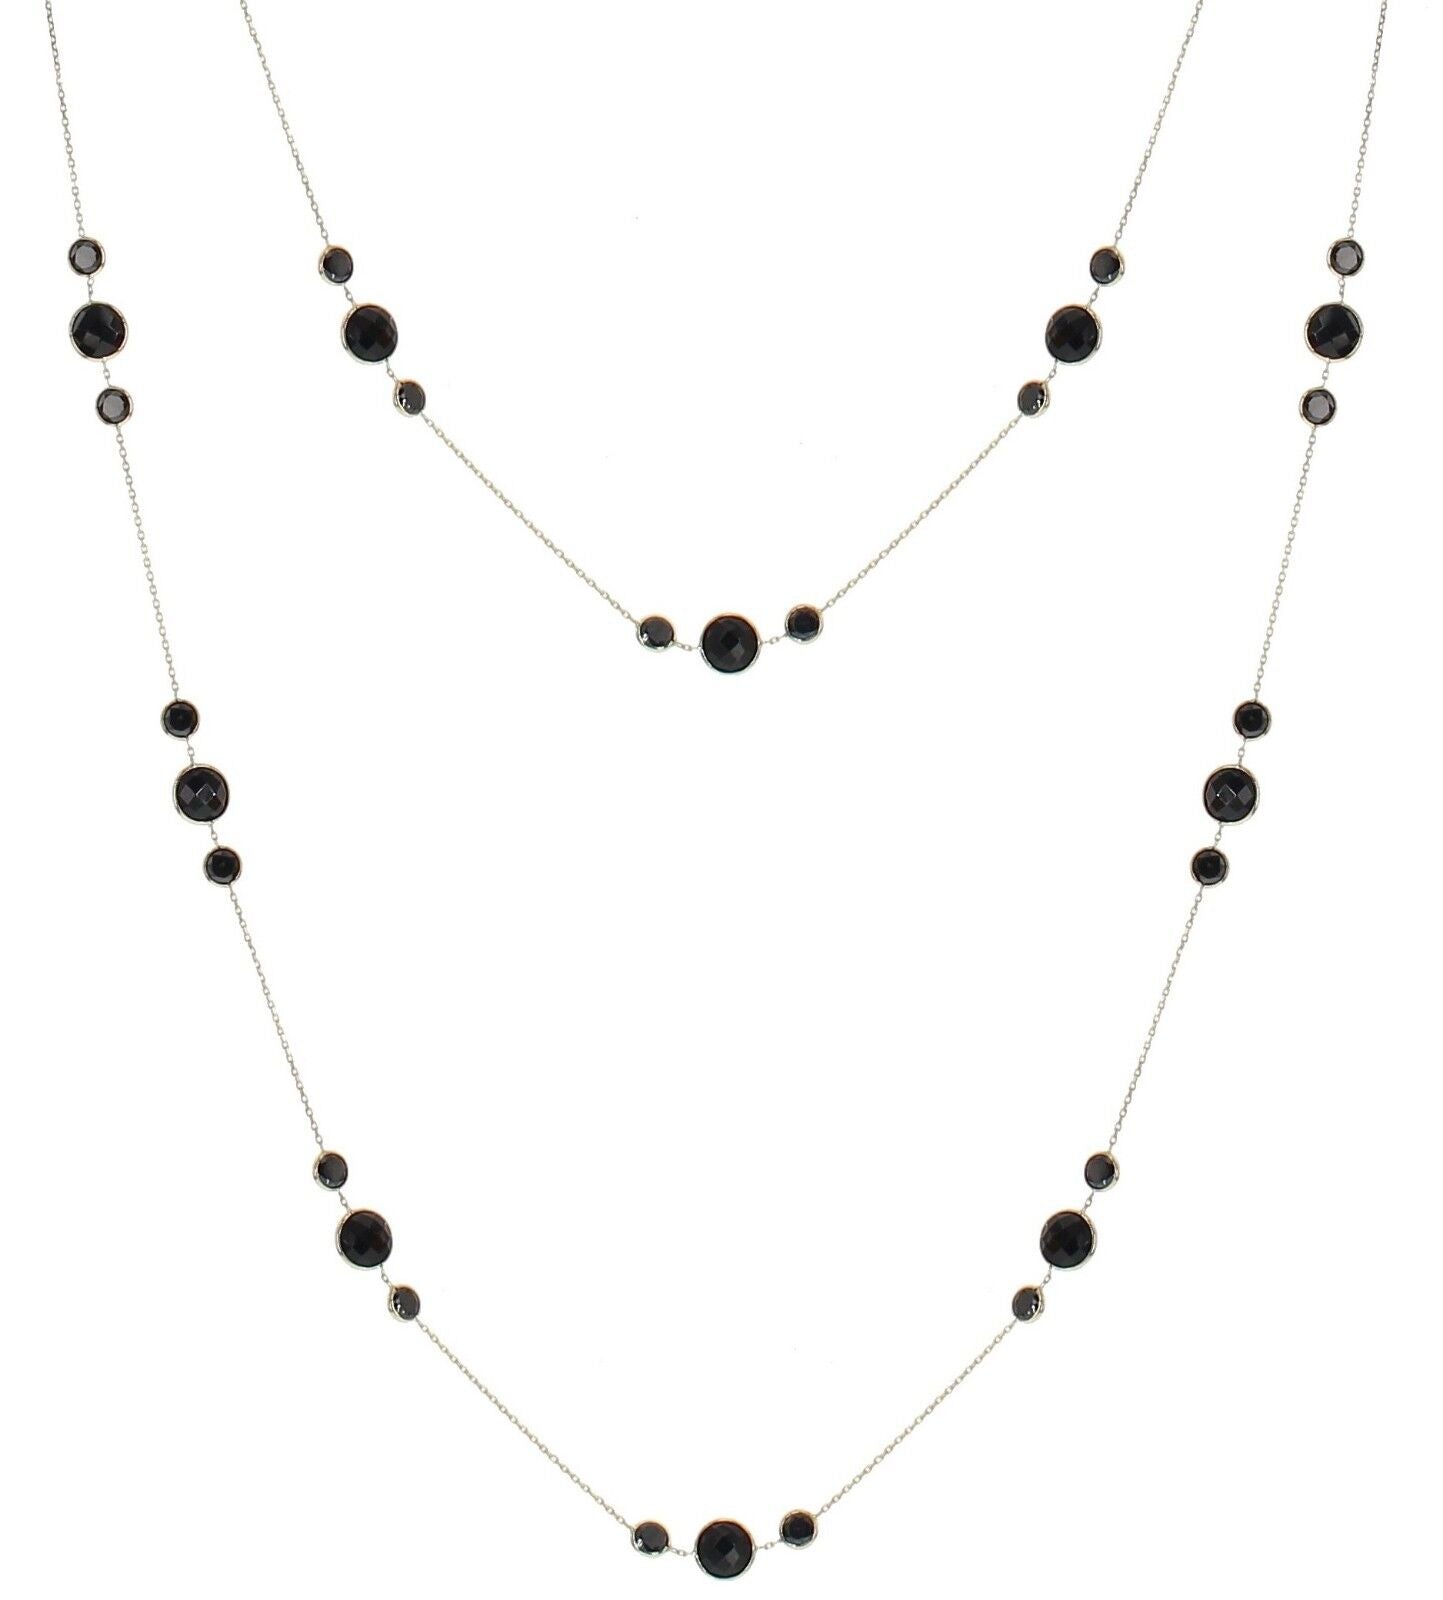 14K Yellow Gold Station Necklace With Round Black Onyx Gemstones 36 Inches